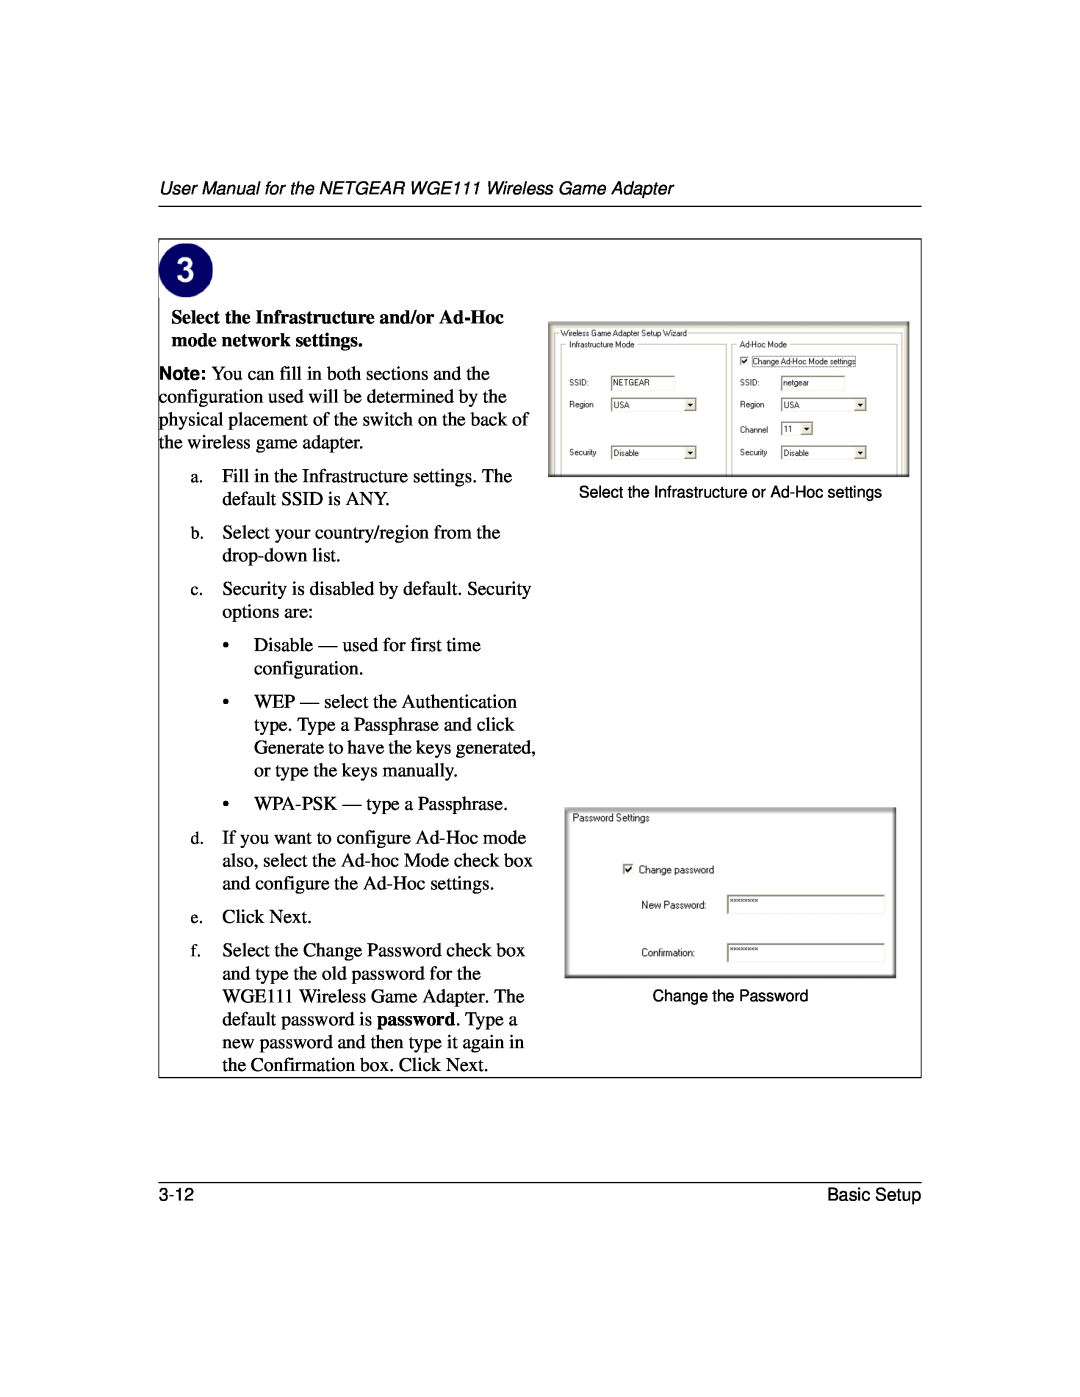 NETGEAR WGE111 user manual Select the Infrastructure and/or Ad-Hoc mode network settings 